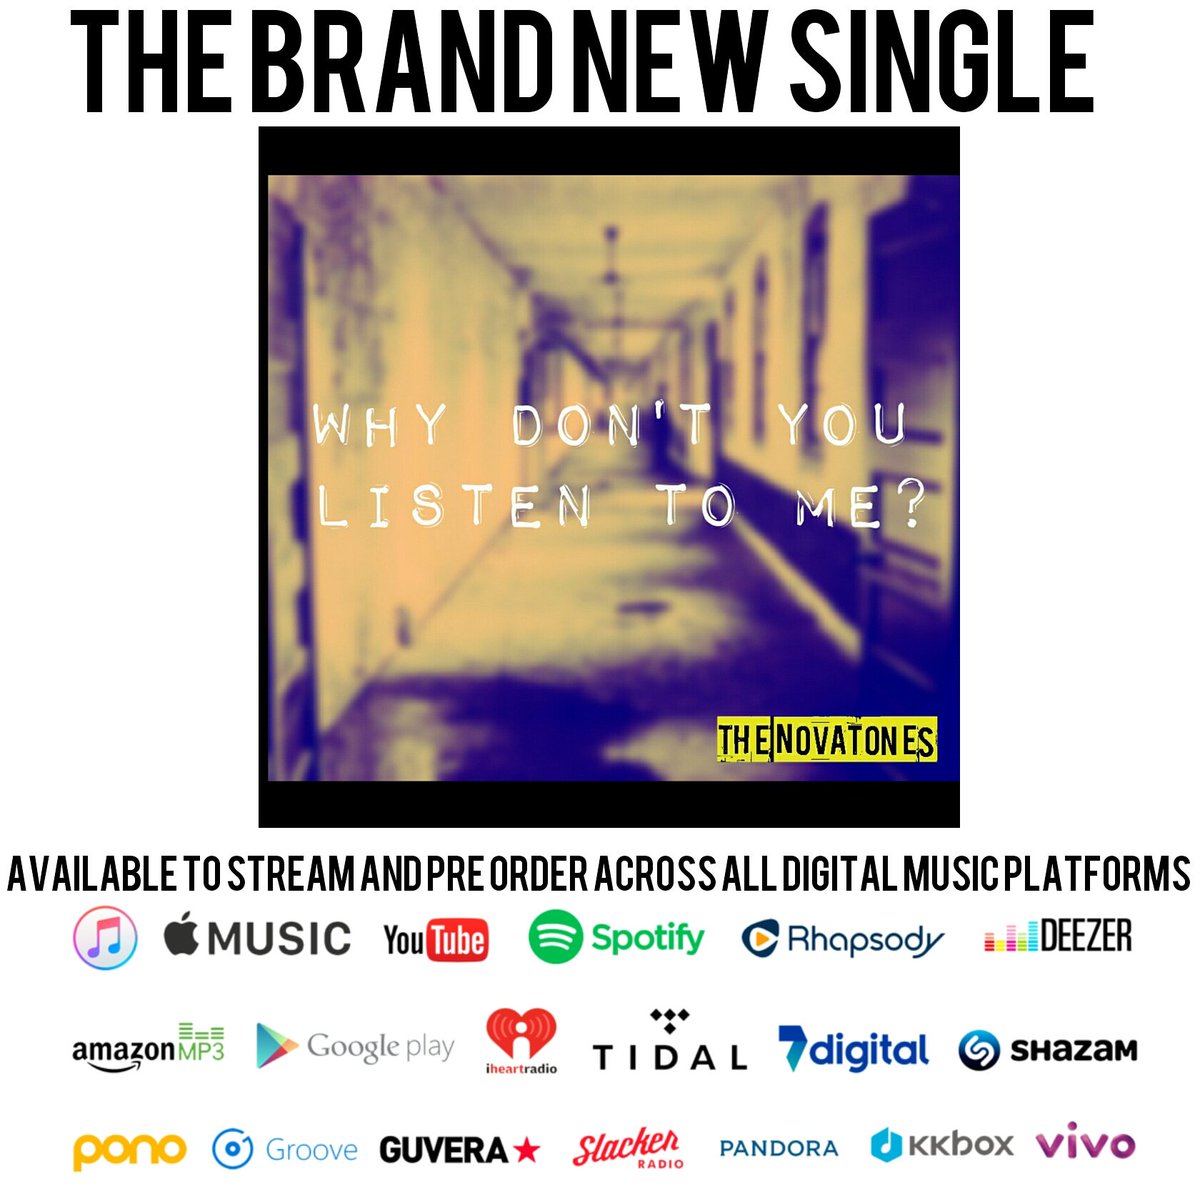 The #brandnew Single is now available to stream and pre order!

#NewSingle #indie #britpop #punk #british #band #britishband #bbcintroducing #bbc6music #BBCRadio1
#radiox